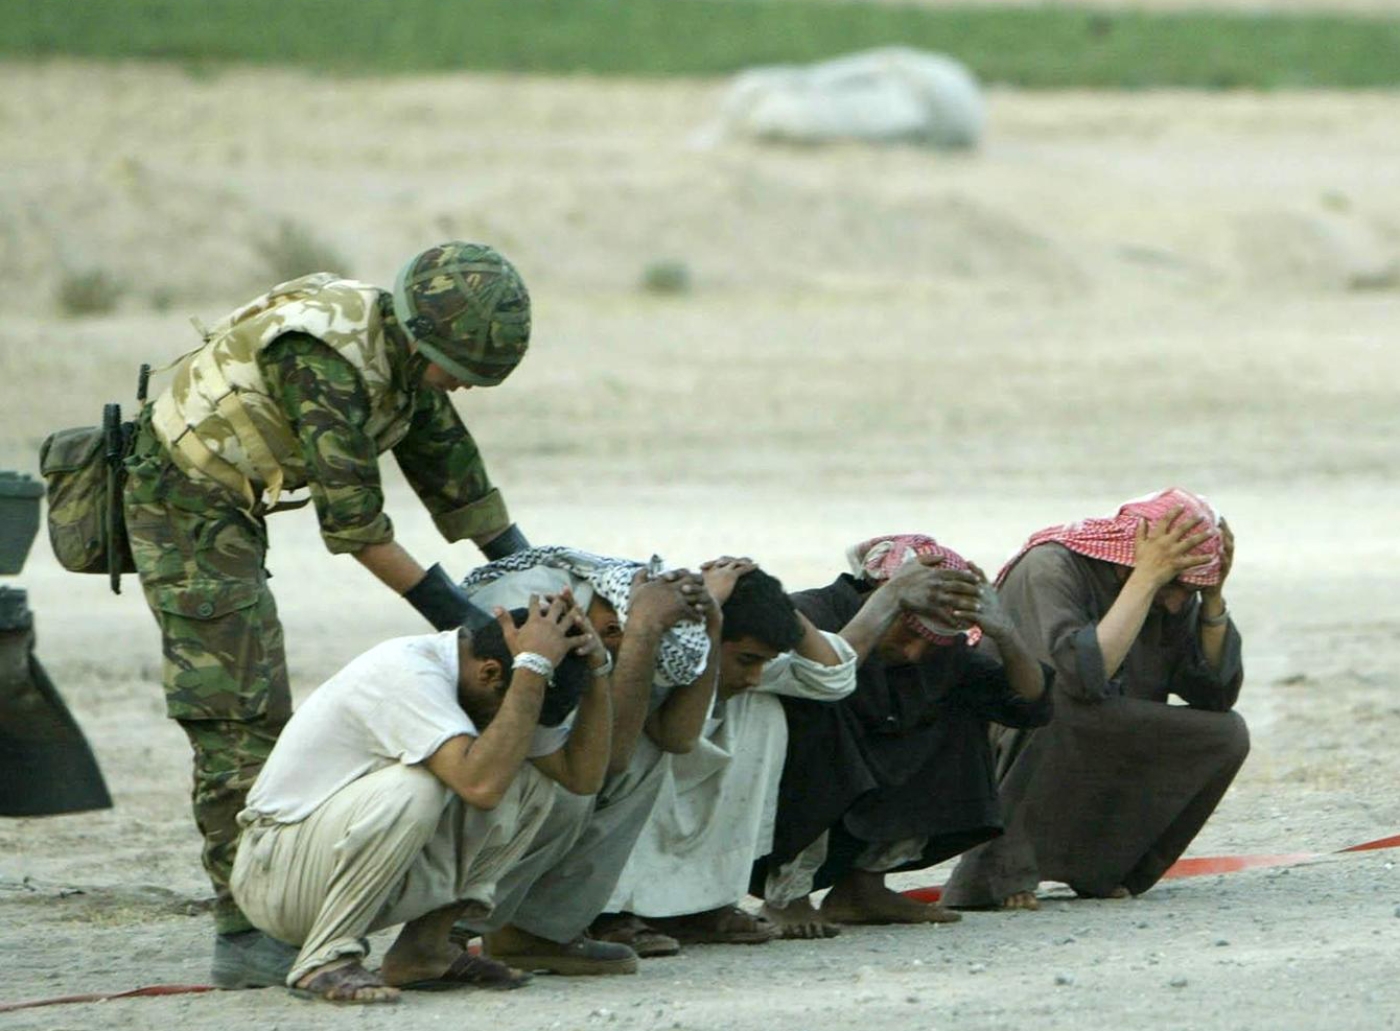 A British soldier searches Iraqis at a checkpoint on the road to Basra in 2003